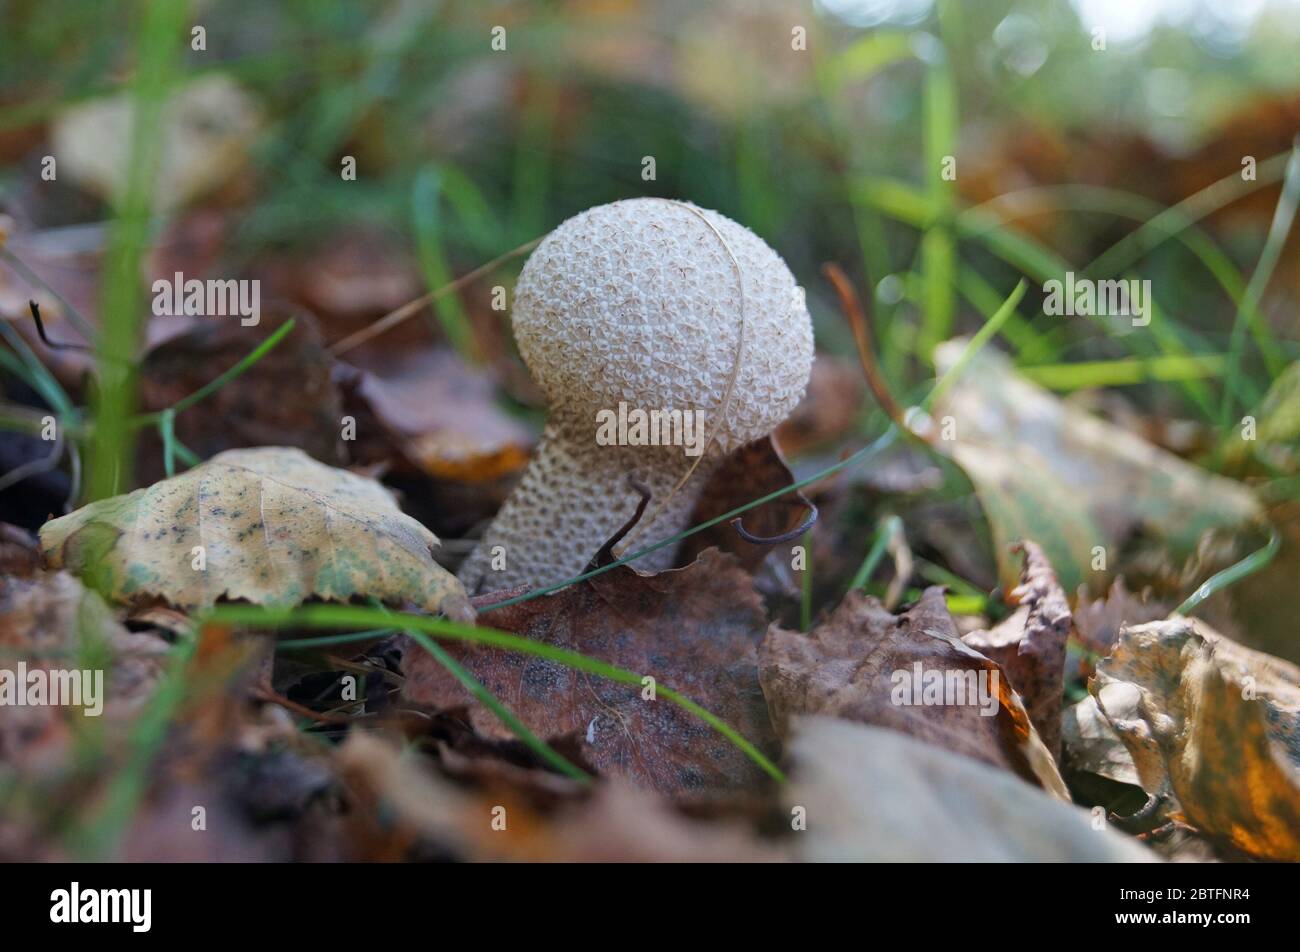 Lycoperdon mushroom with a white hat in a pimple and a white leg grows in a forest in fallen leaves Stock Photo